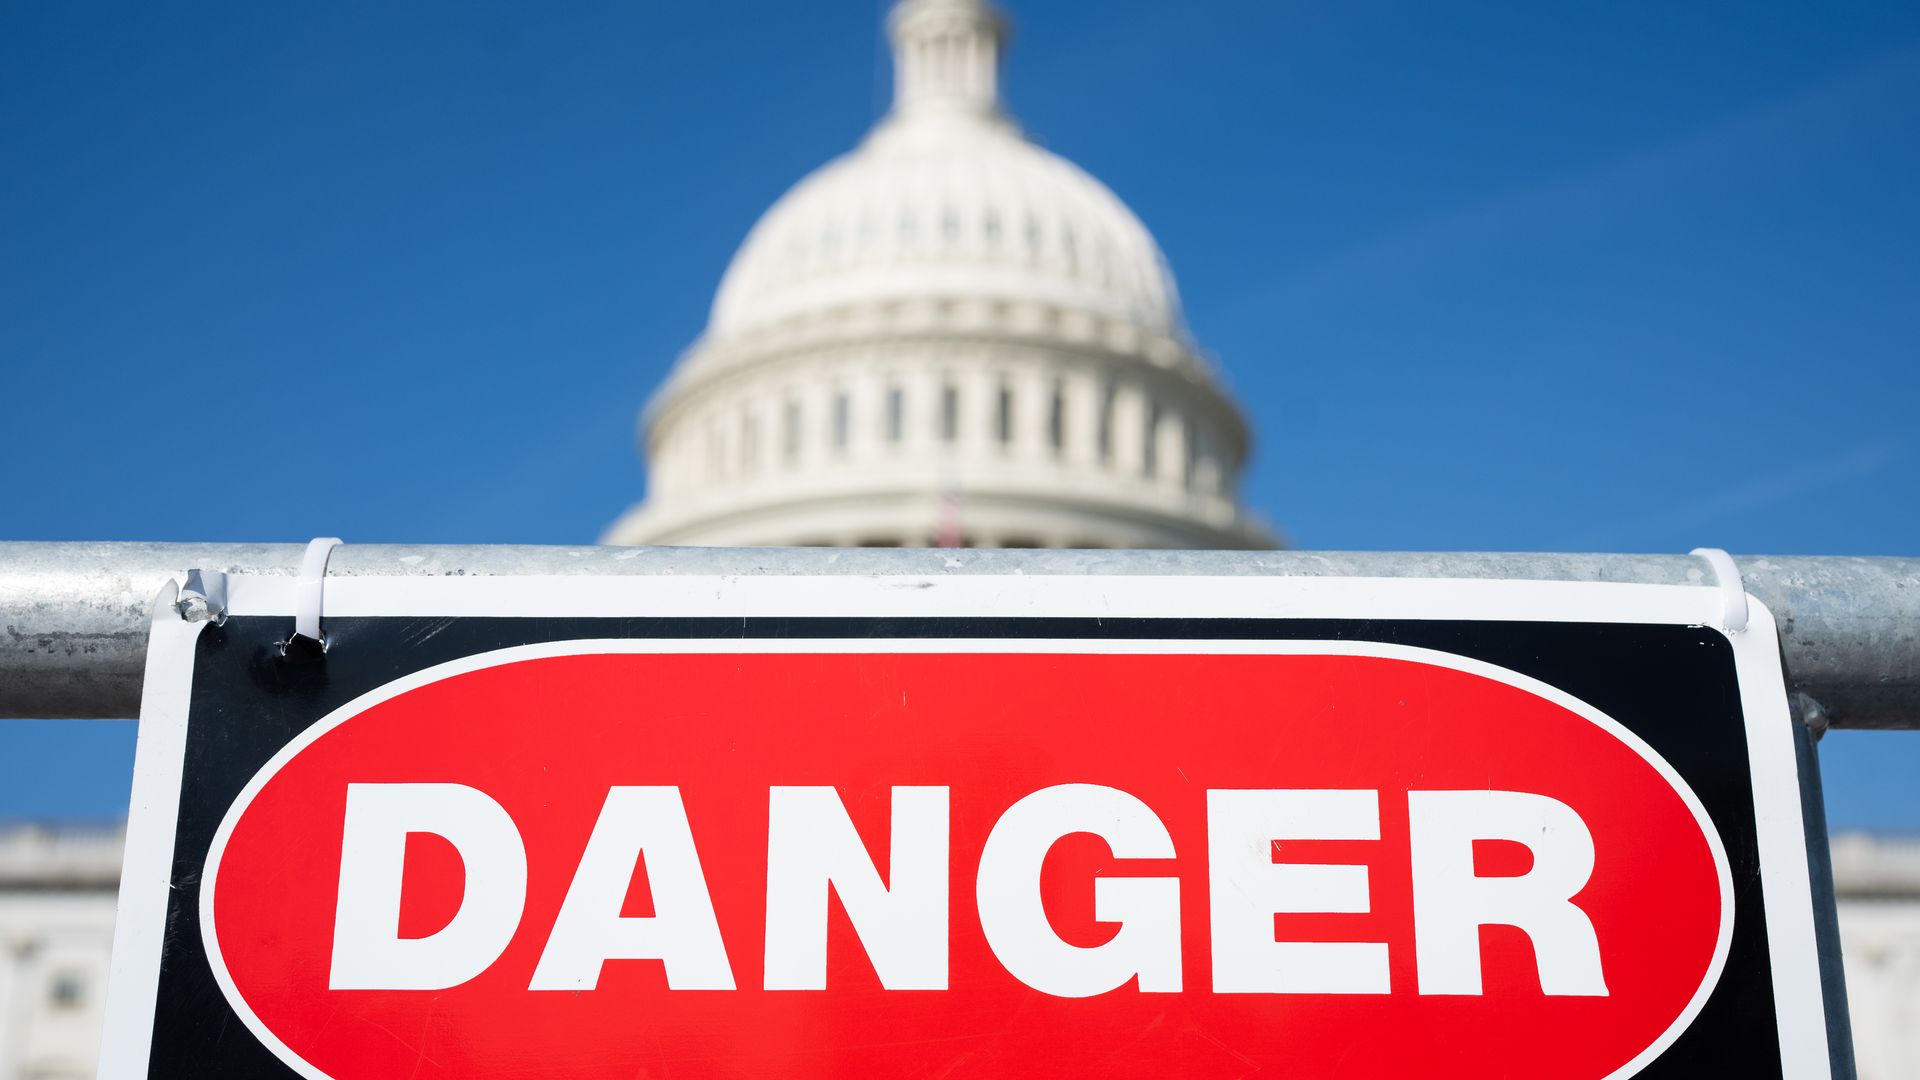  A "danger" sign is posted at a work site on the East Plaza of the U.S. Capitol